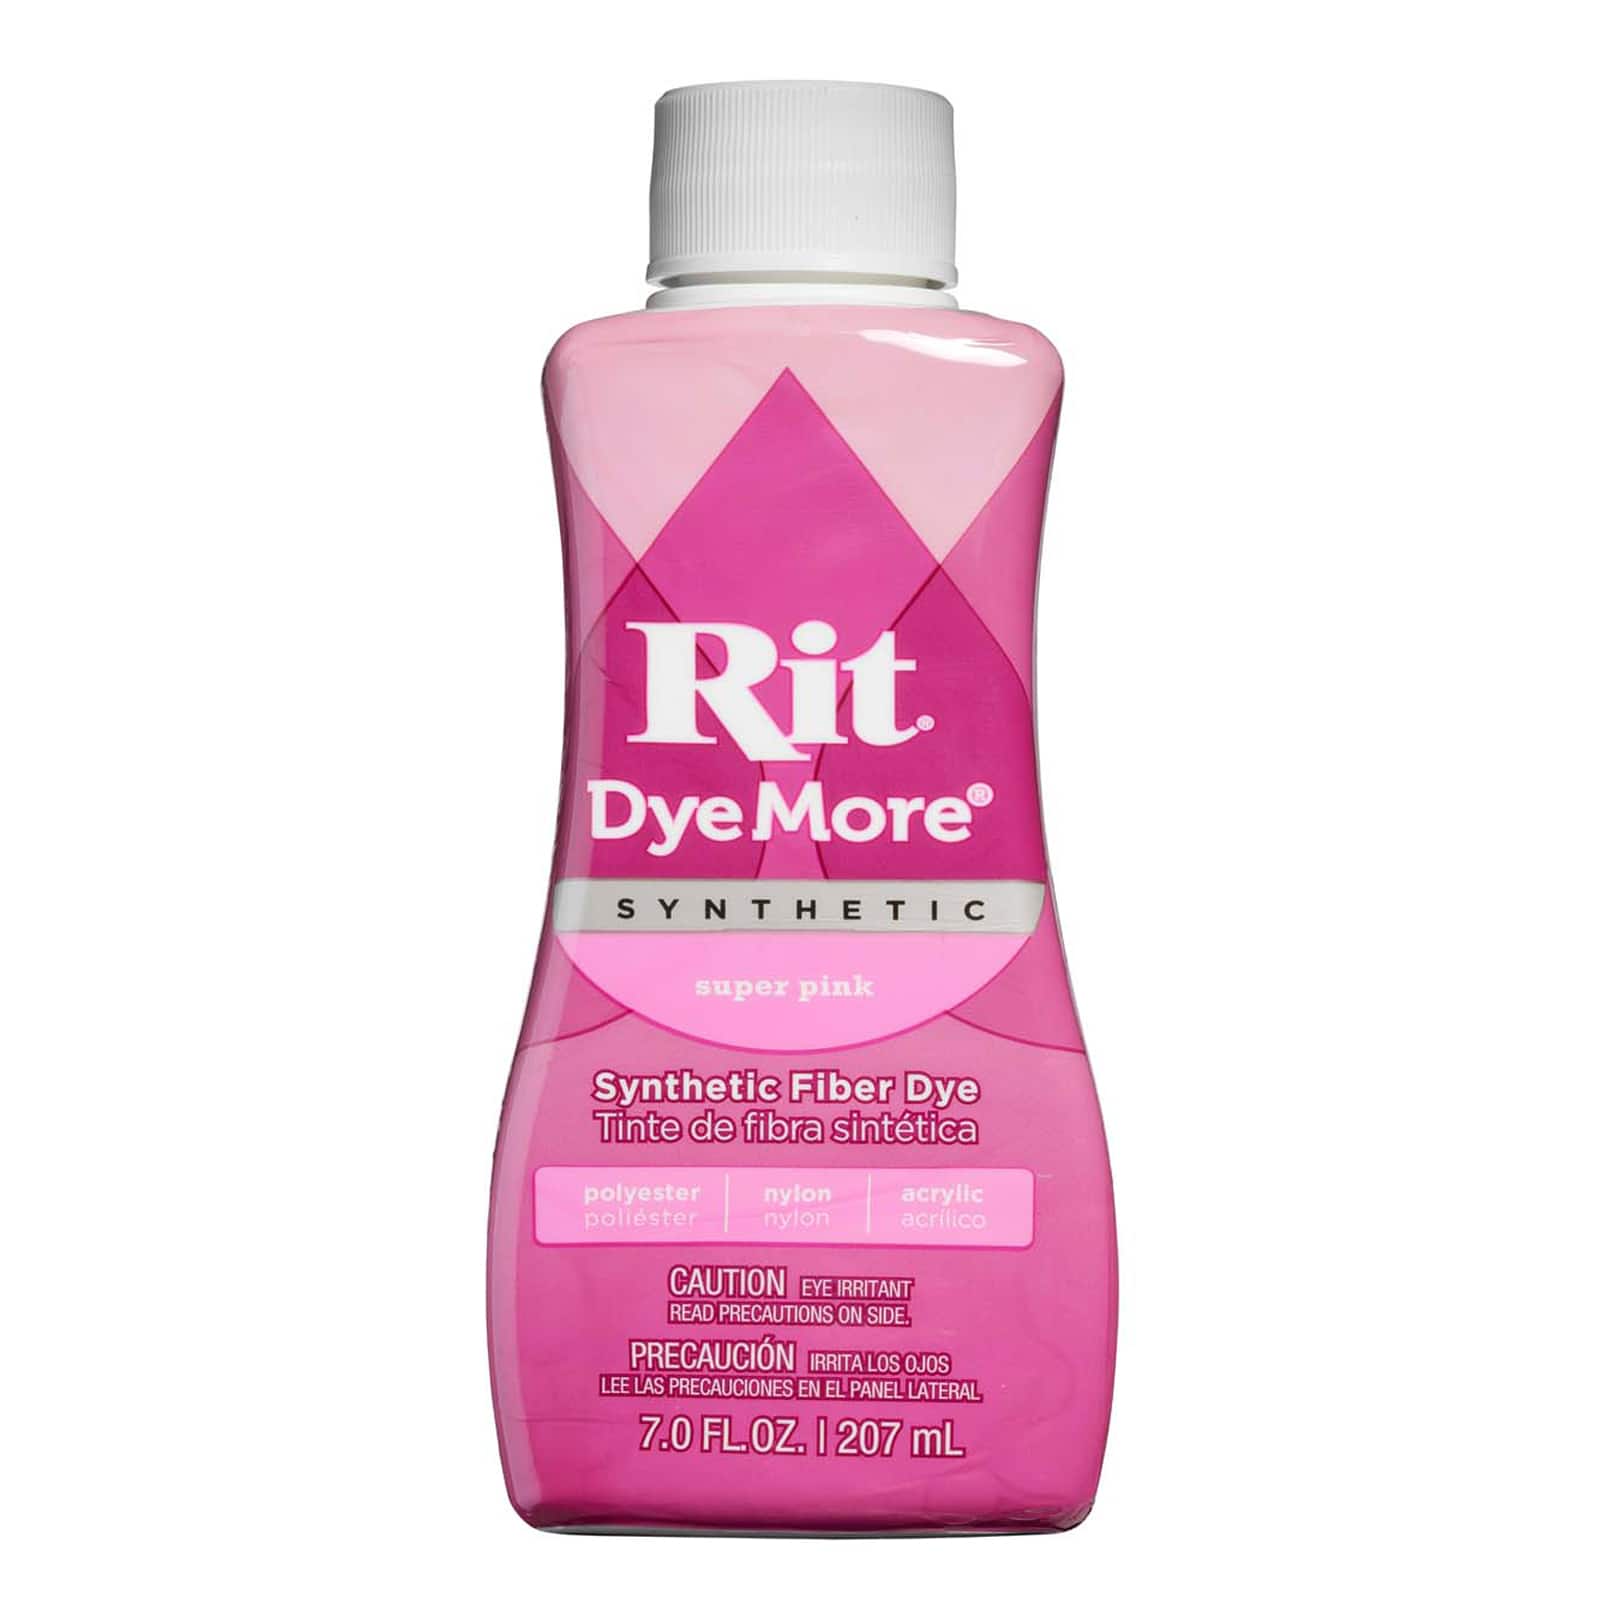 Rit DyeMore Synthetic Liquid Dye, 12 Pack, Sand Stone